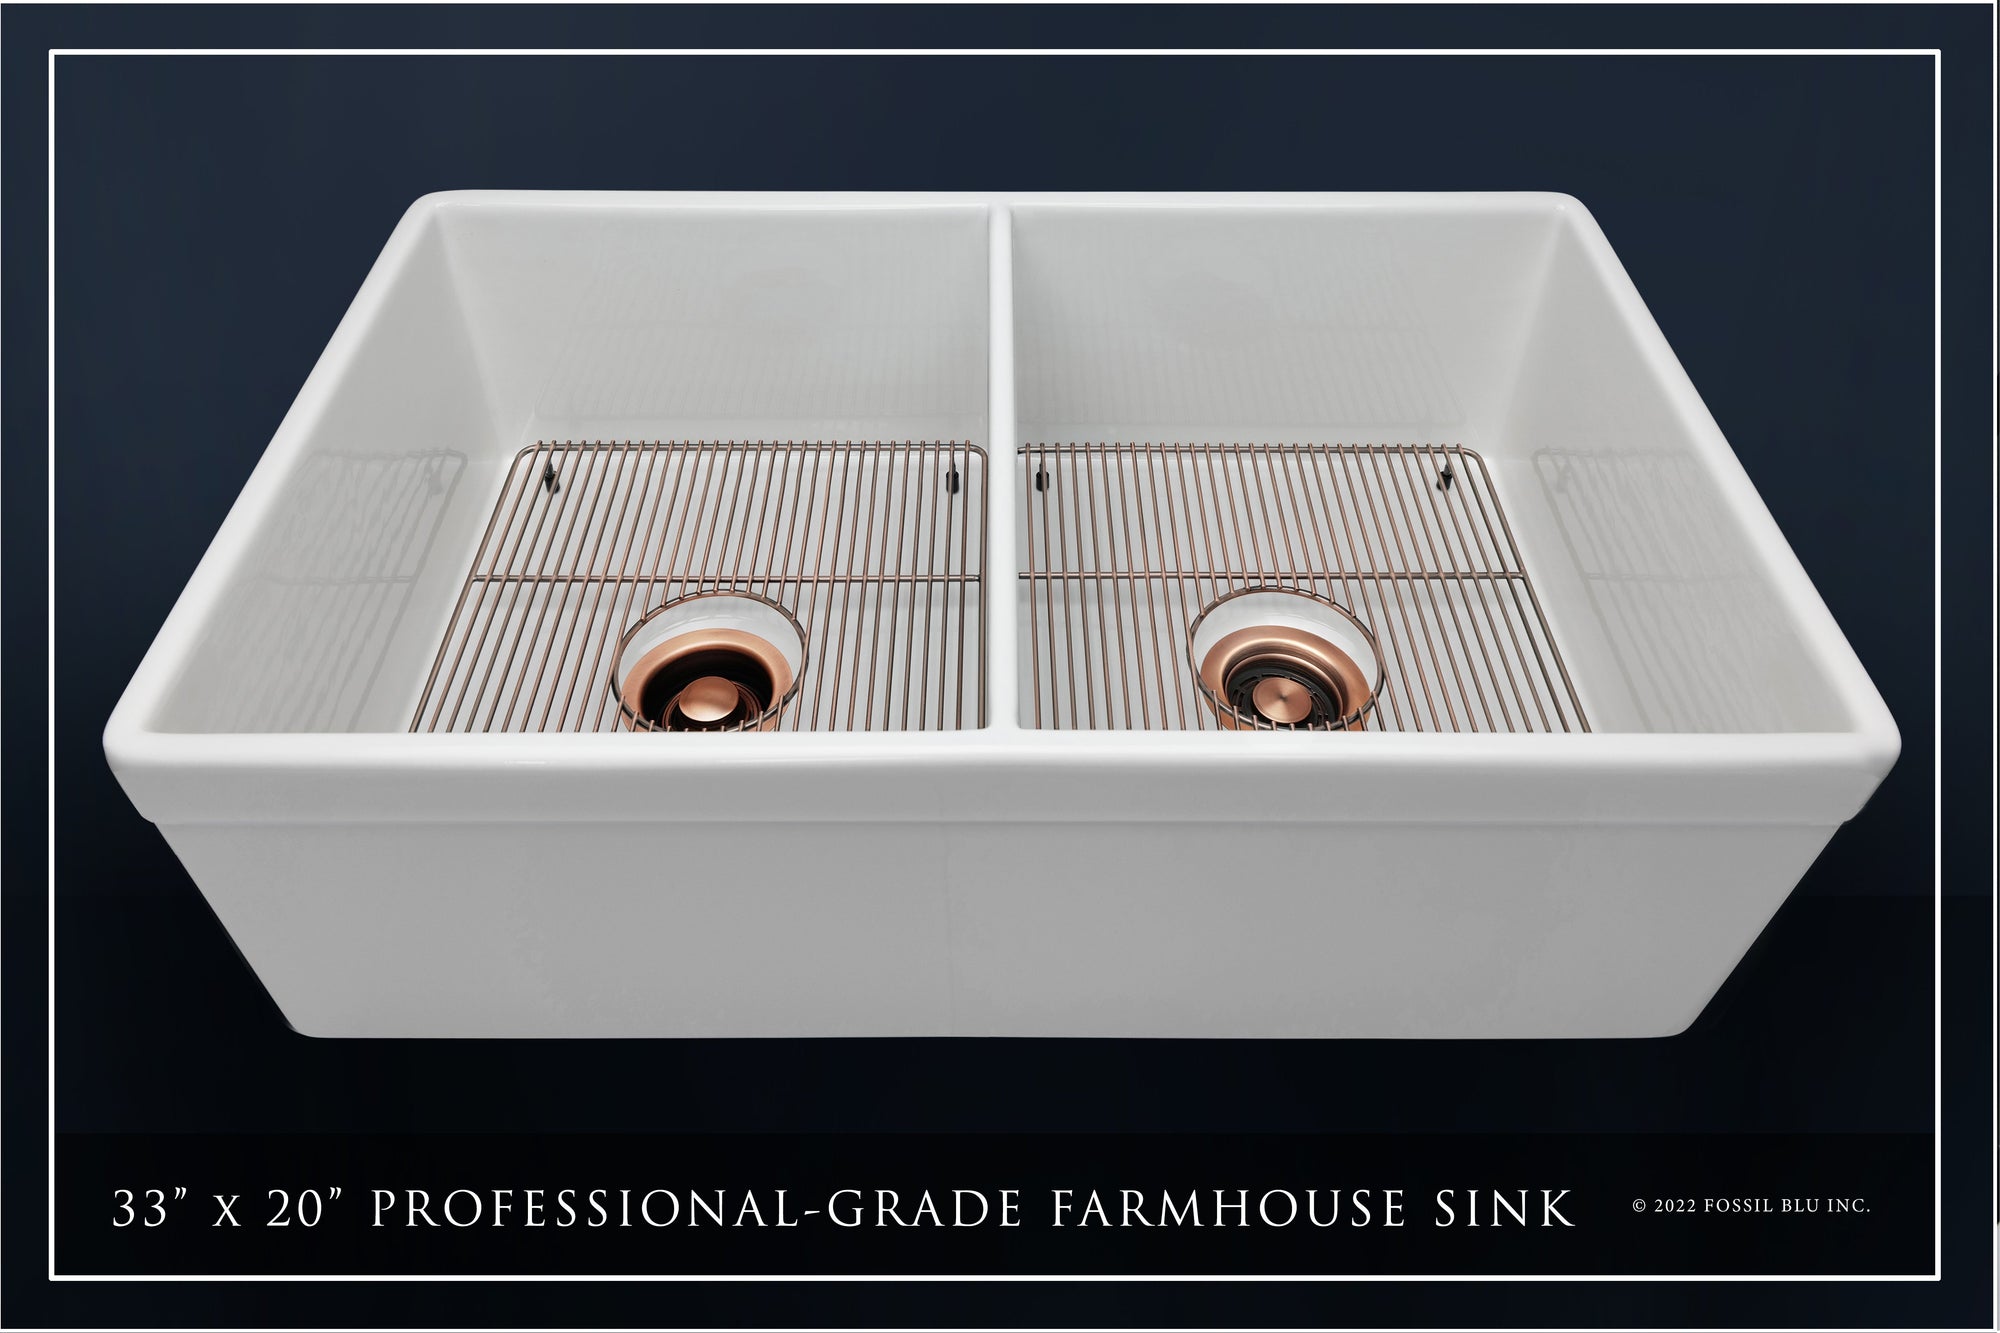 FSW1012AC LUXURY 33-INCH SOLID FIRECLAY FARMHOUSE SINK IN WHITE, ANTIQUE COPPER ACCS, BELTED FRONT